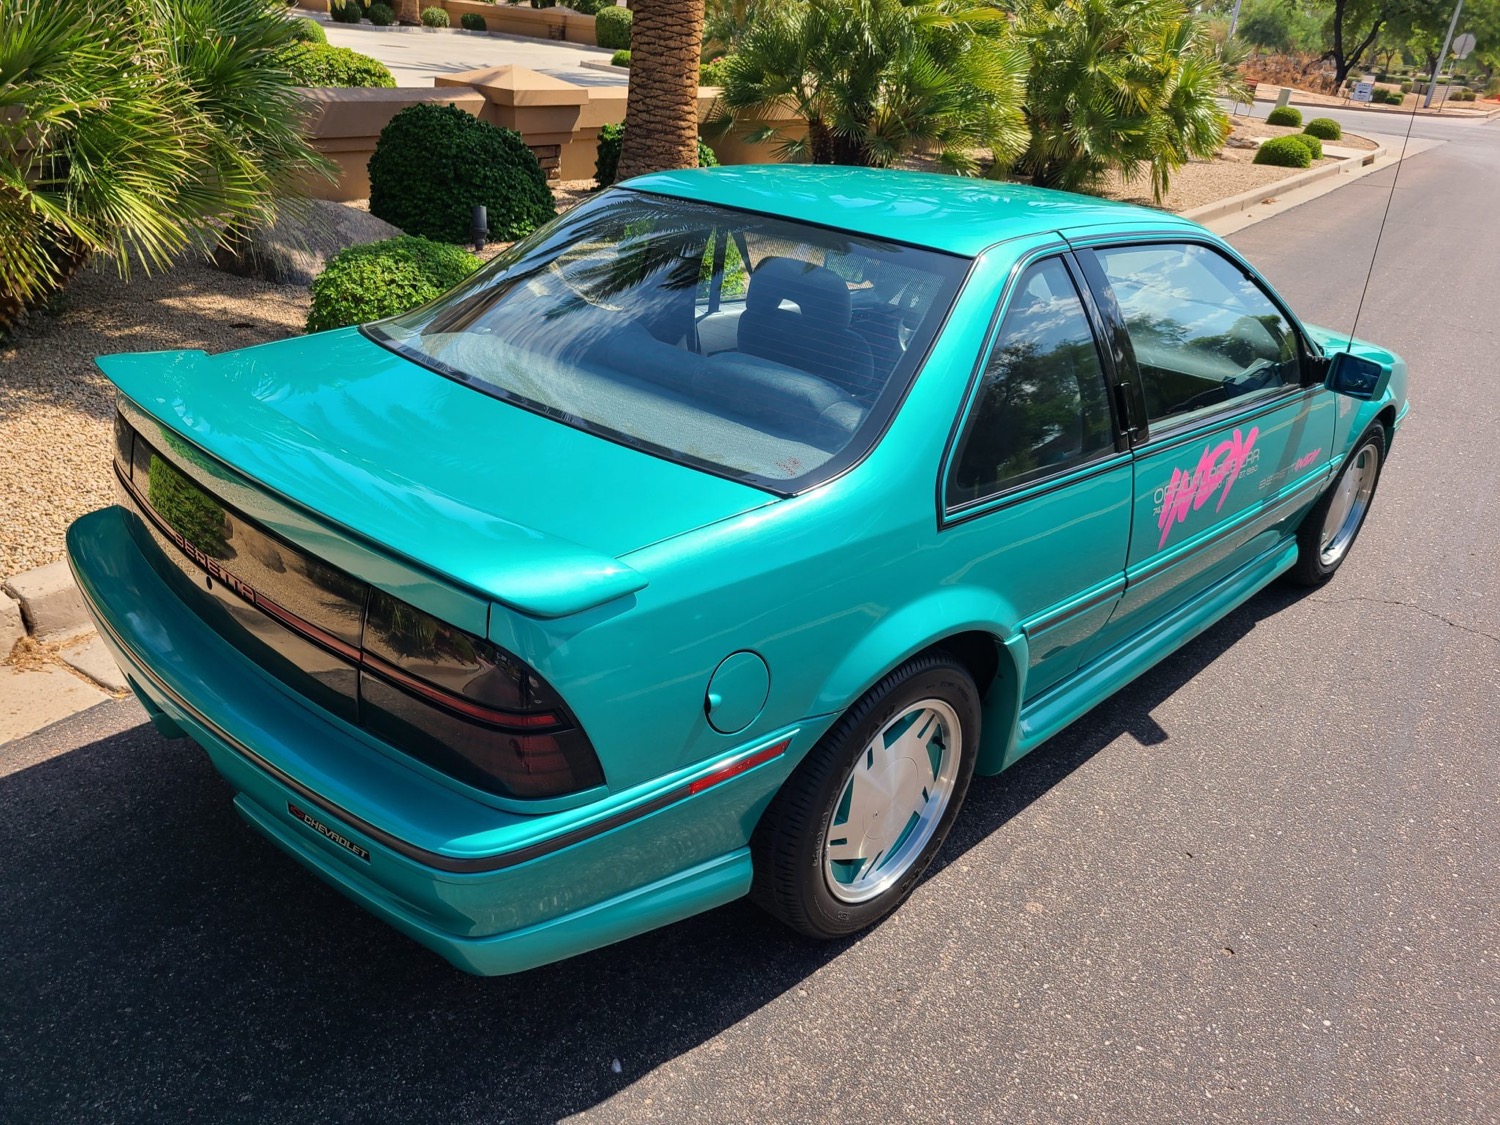 1990 Chevrolet Beretta Indy Pace Car Edition Turquoise Metallic Bring A Trailer September 2020 exterior 005